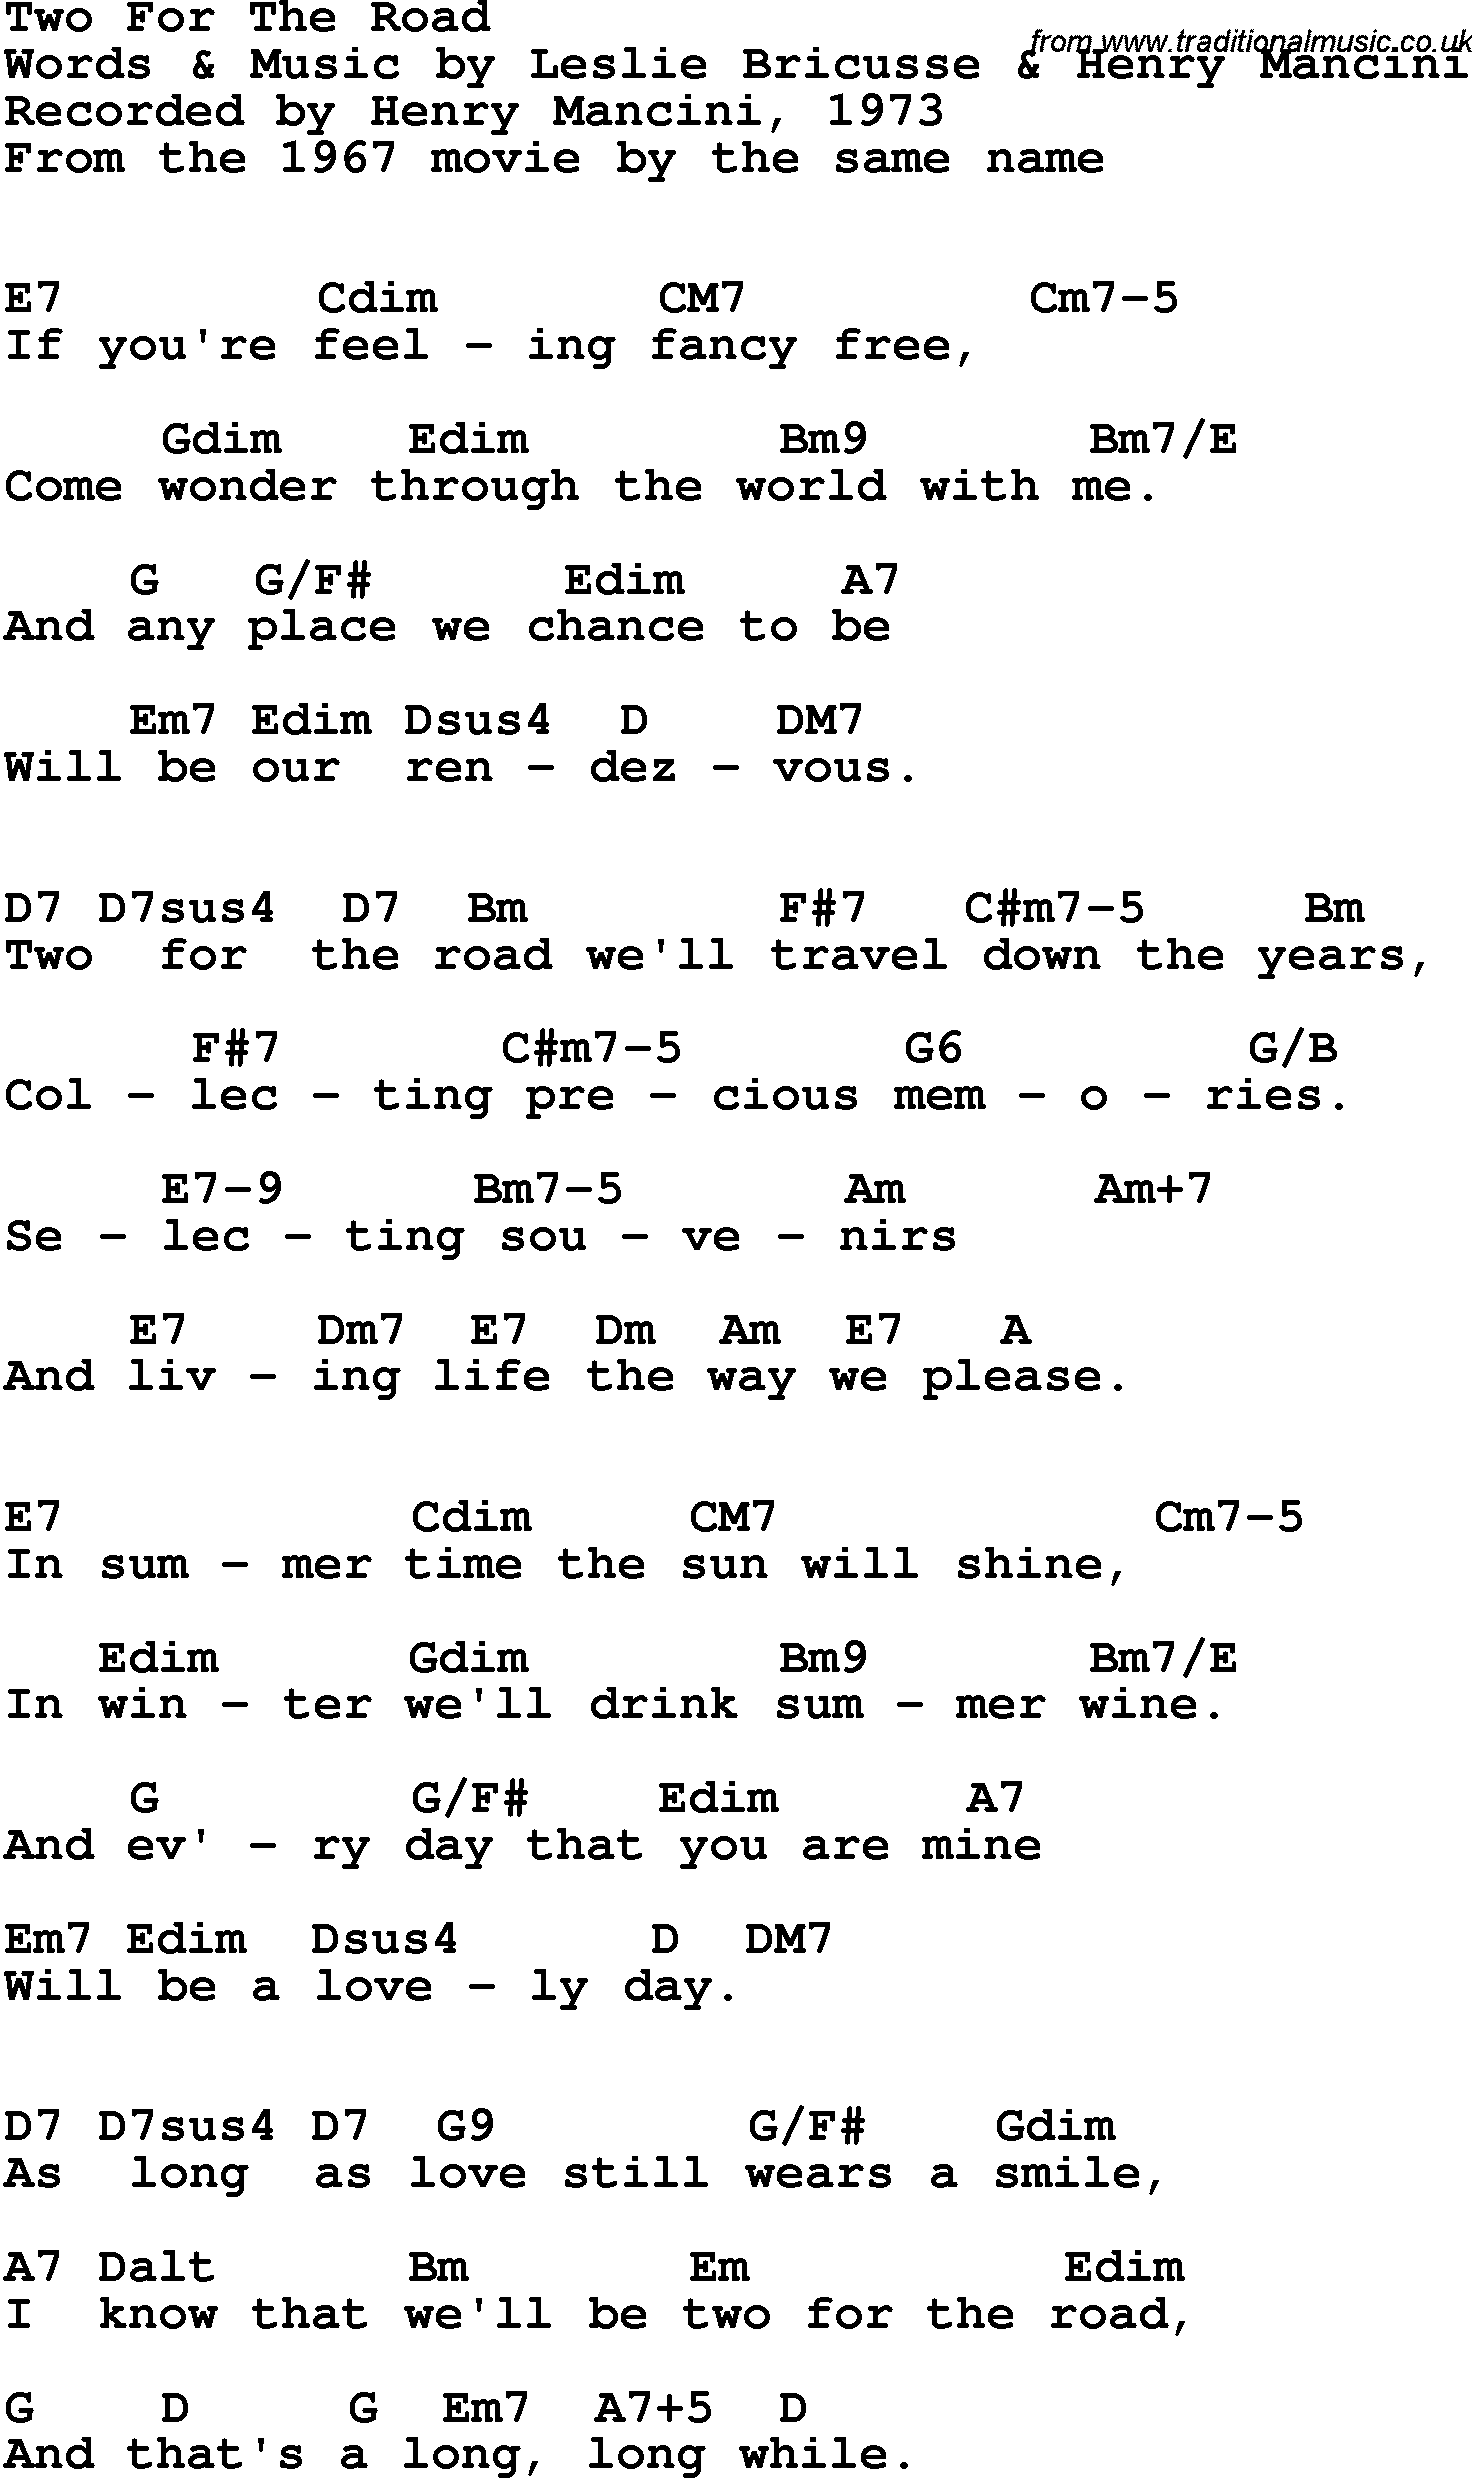 Song Lyrics with guitar chords for Two For The Road - Henry Mancini, 1973